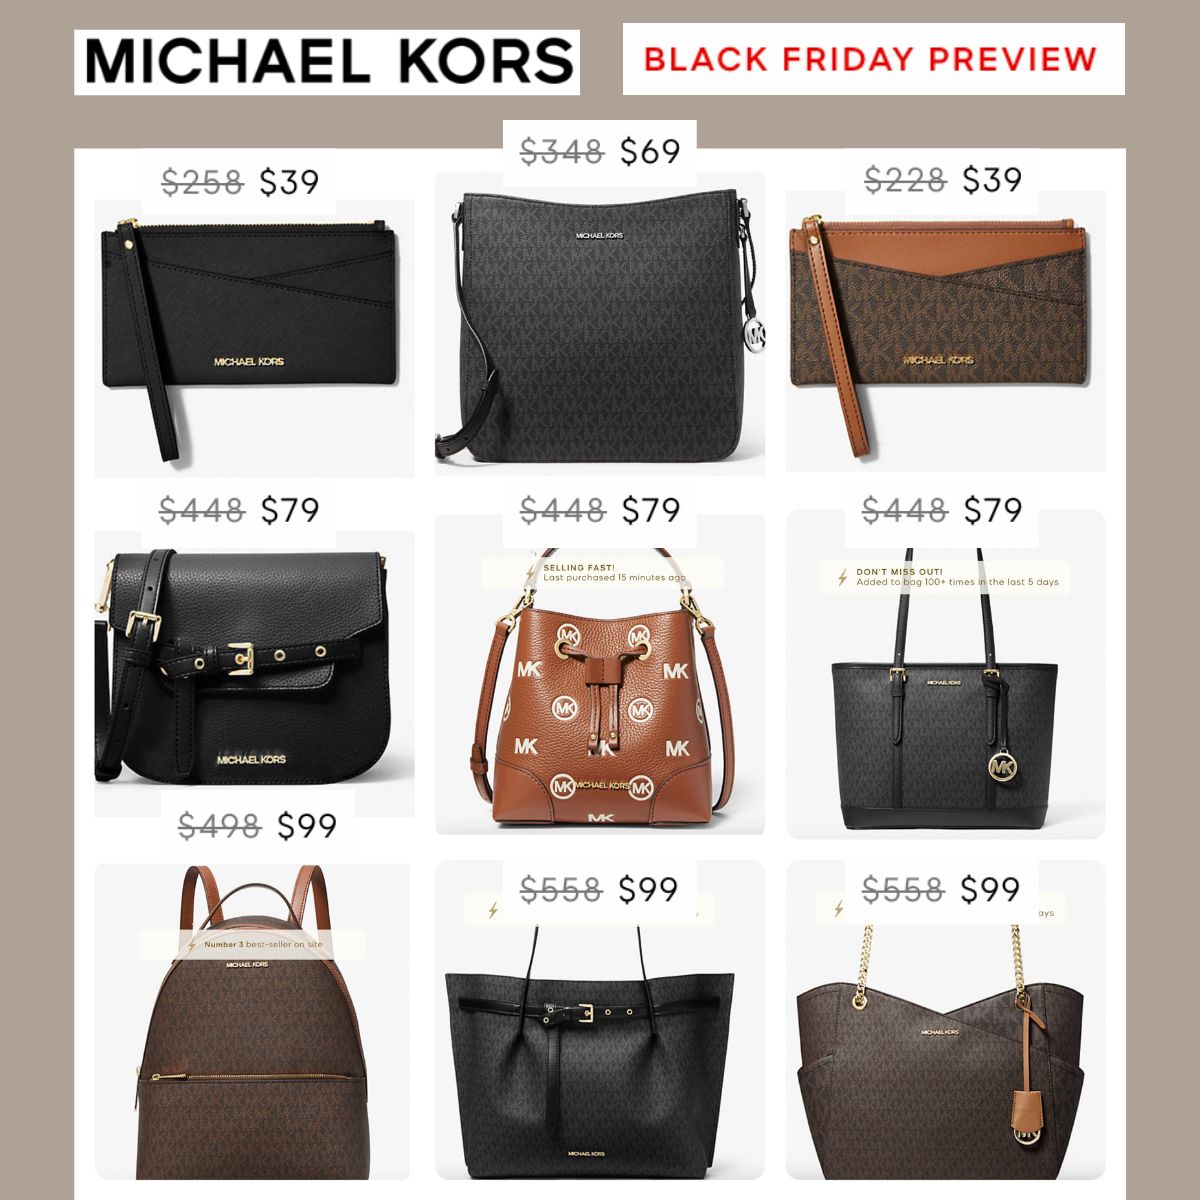 Cyber Monday 2020: The best deals from Michael Kors